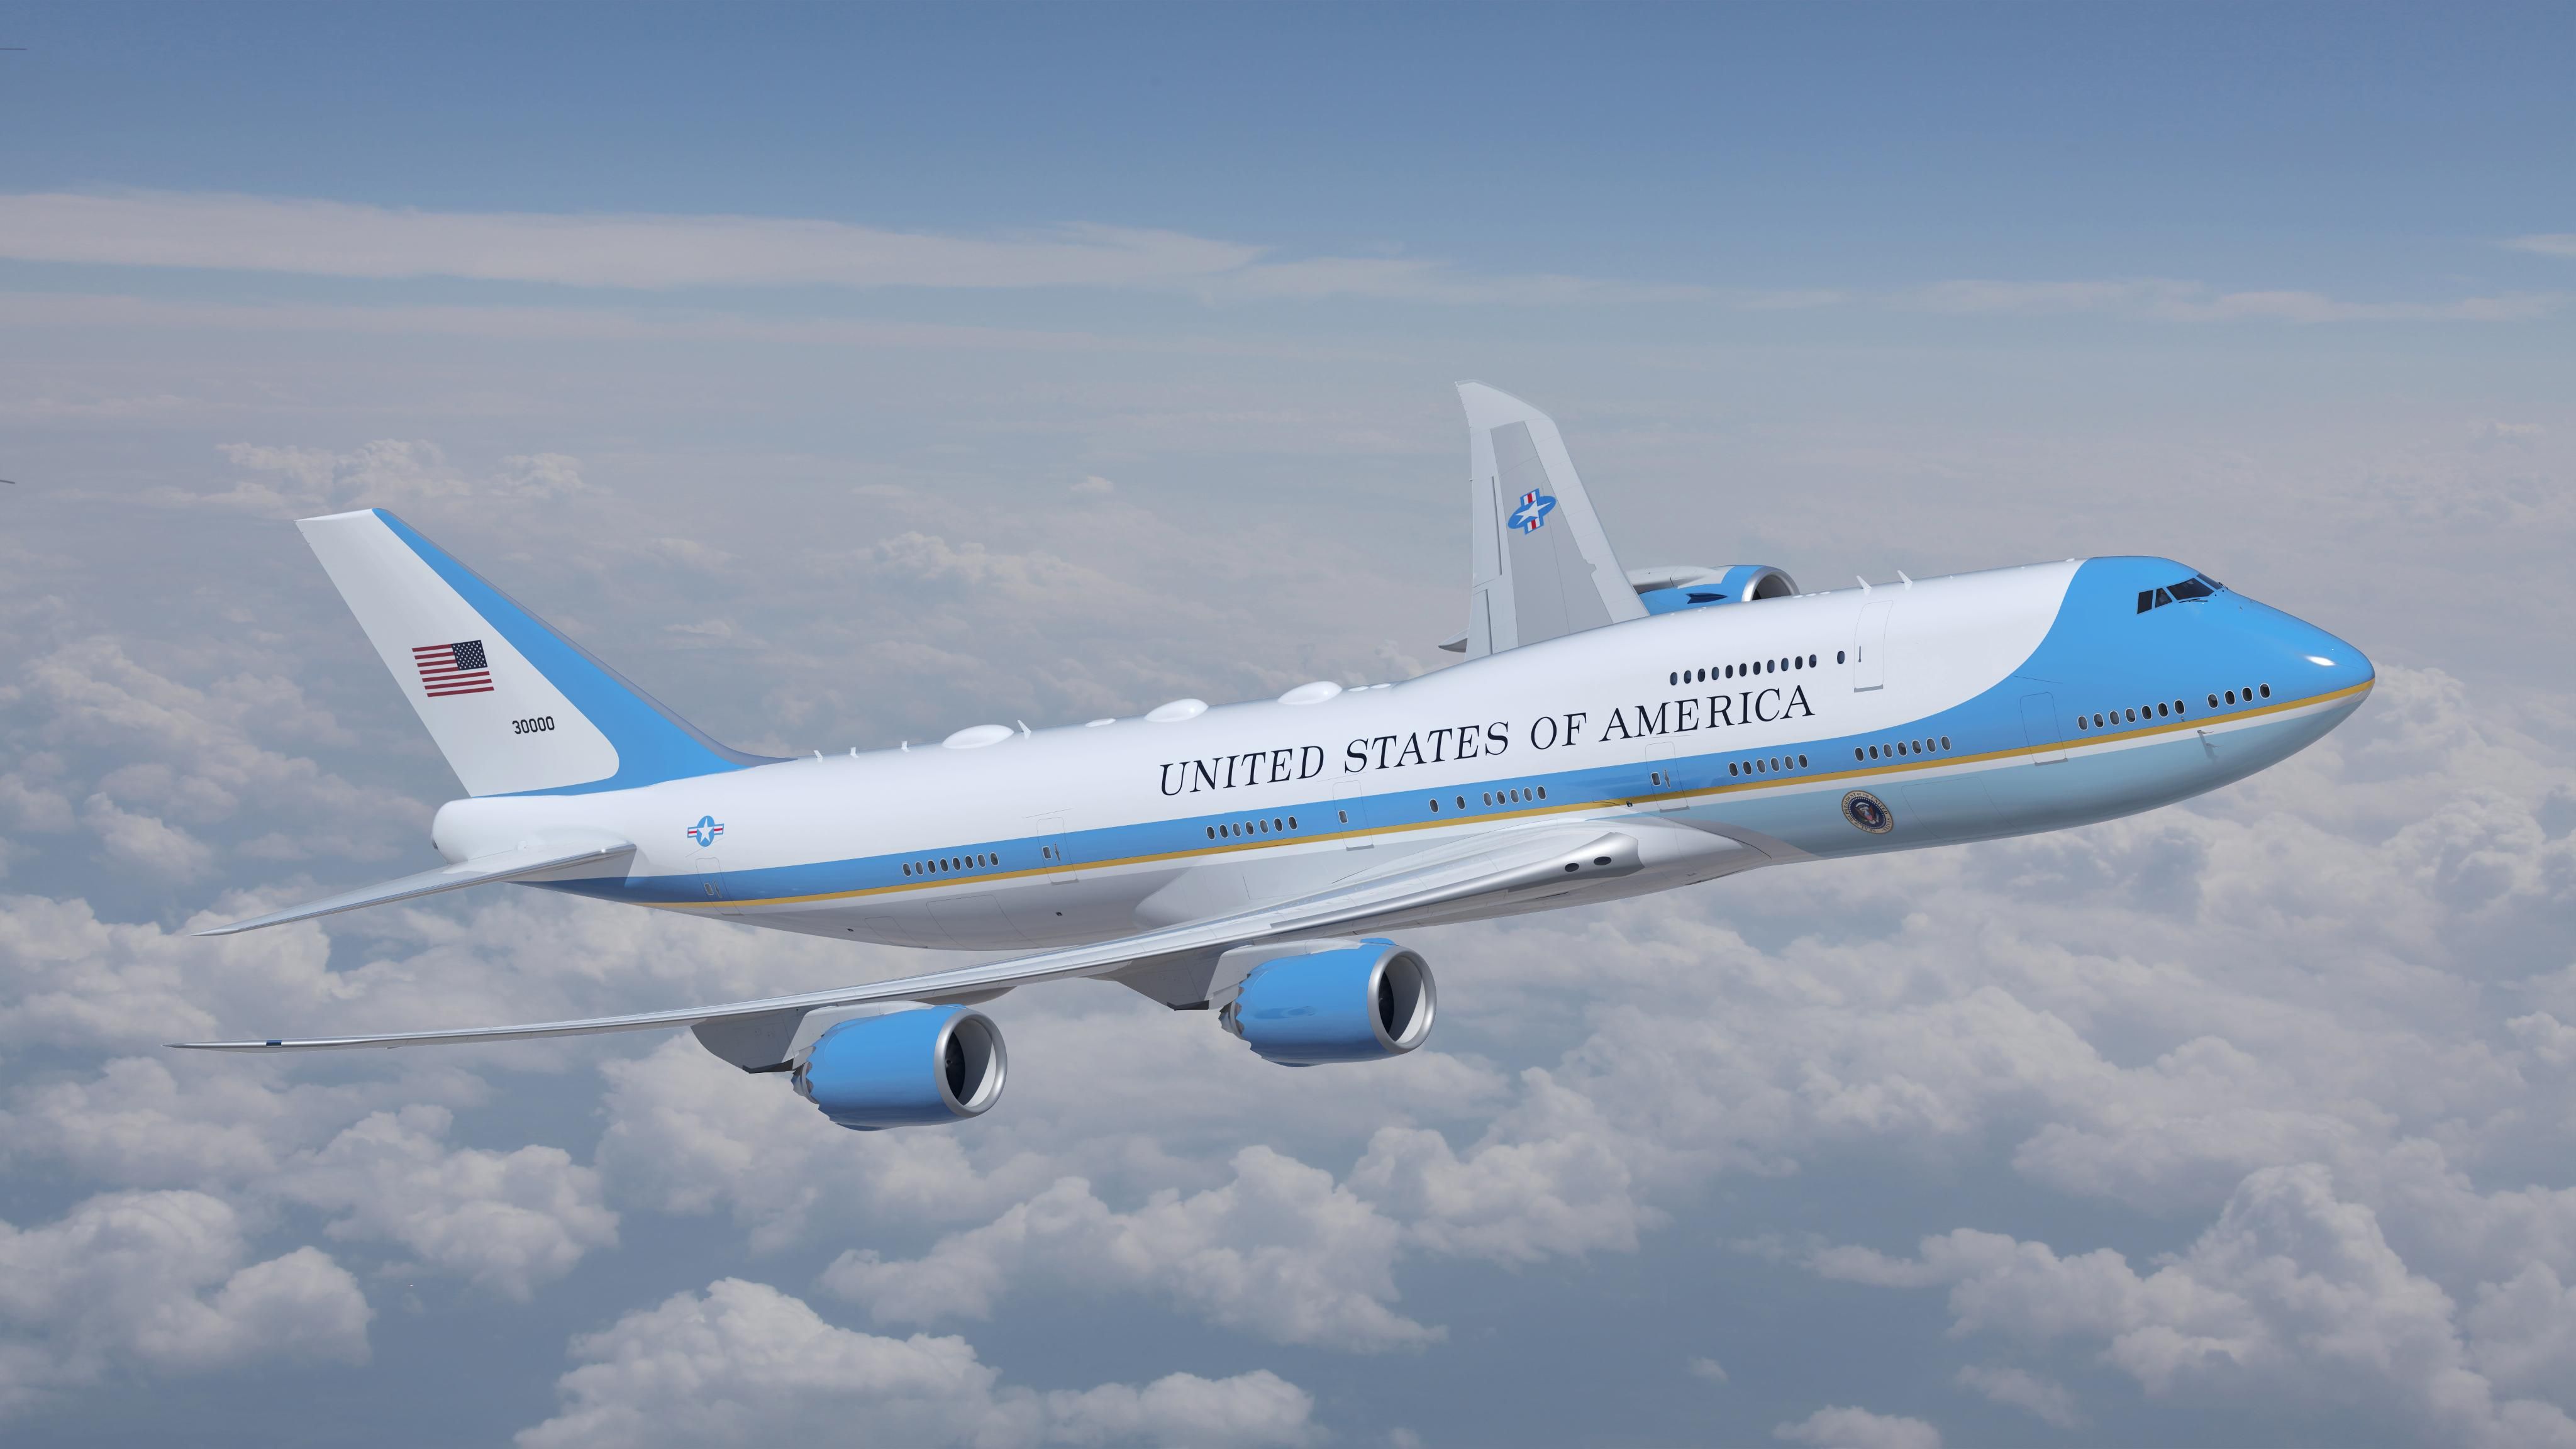 VC-25B: Everything We Know About The New Air Force One Boeing 747 